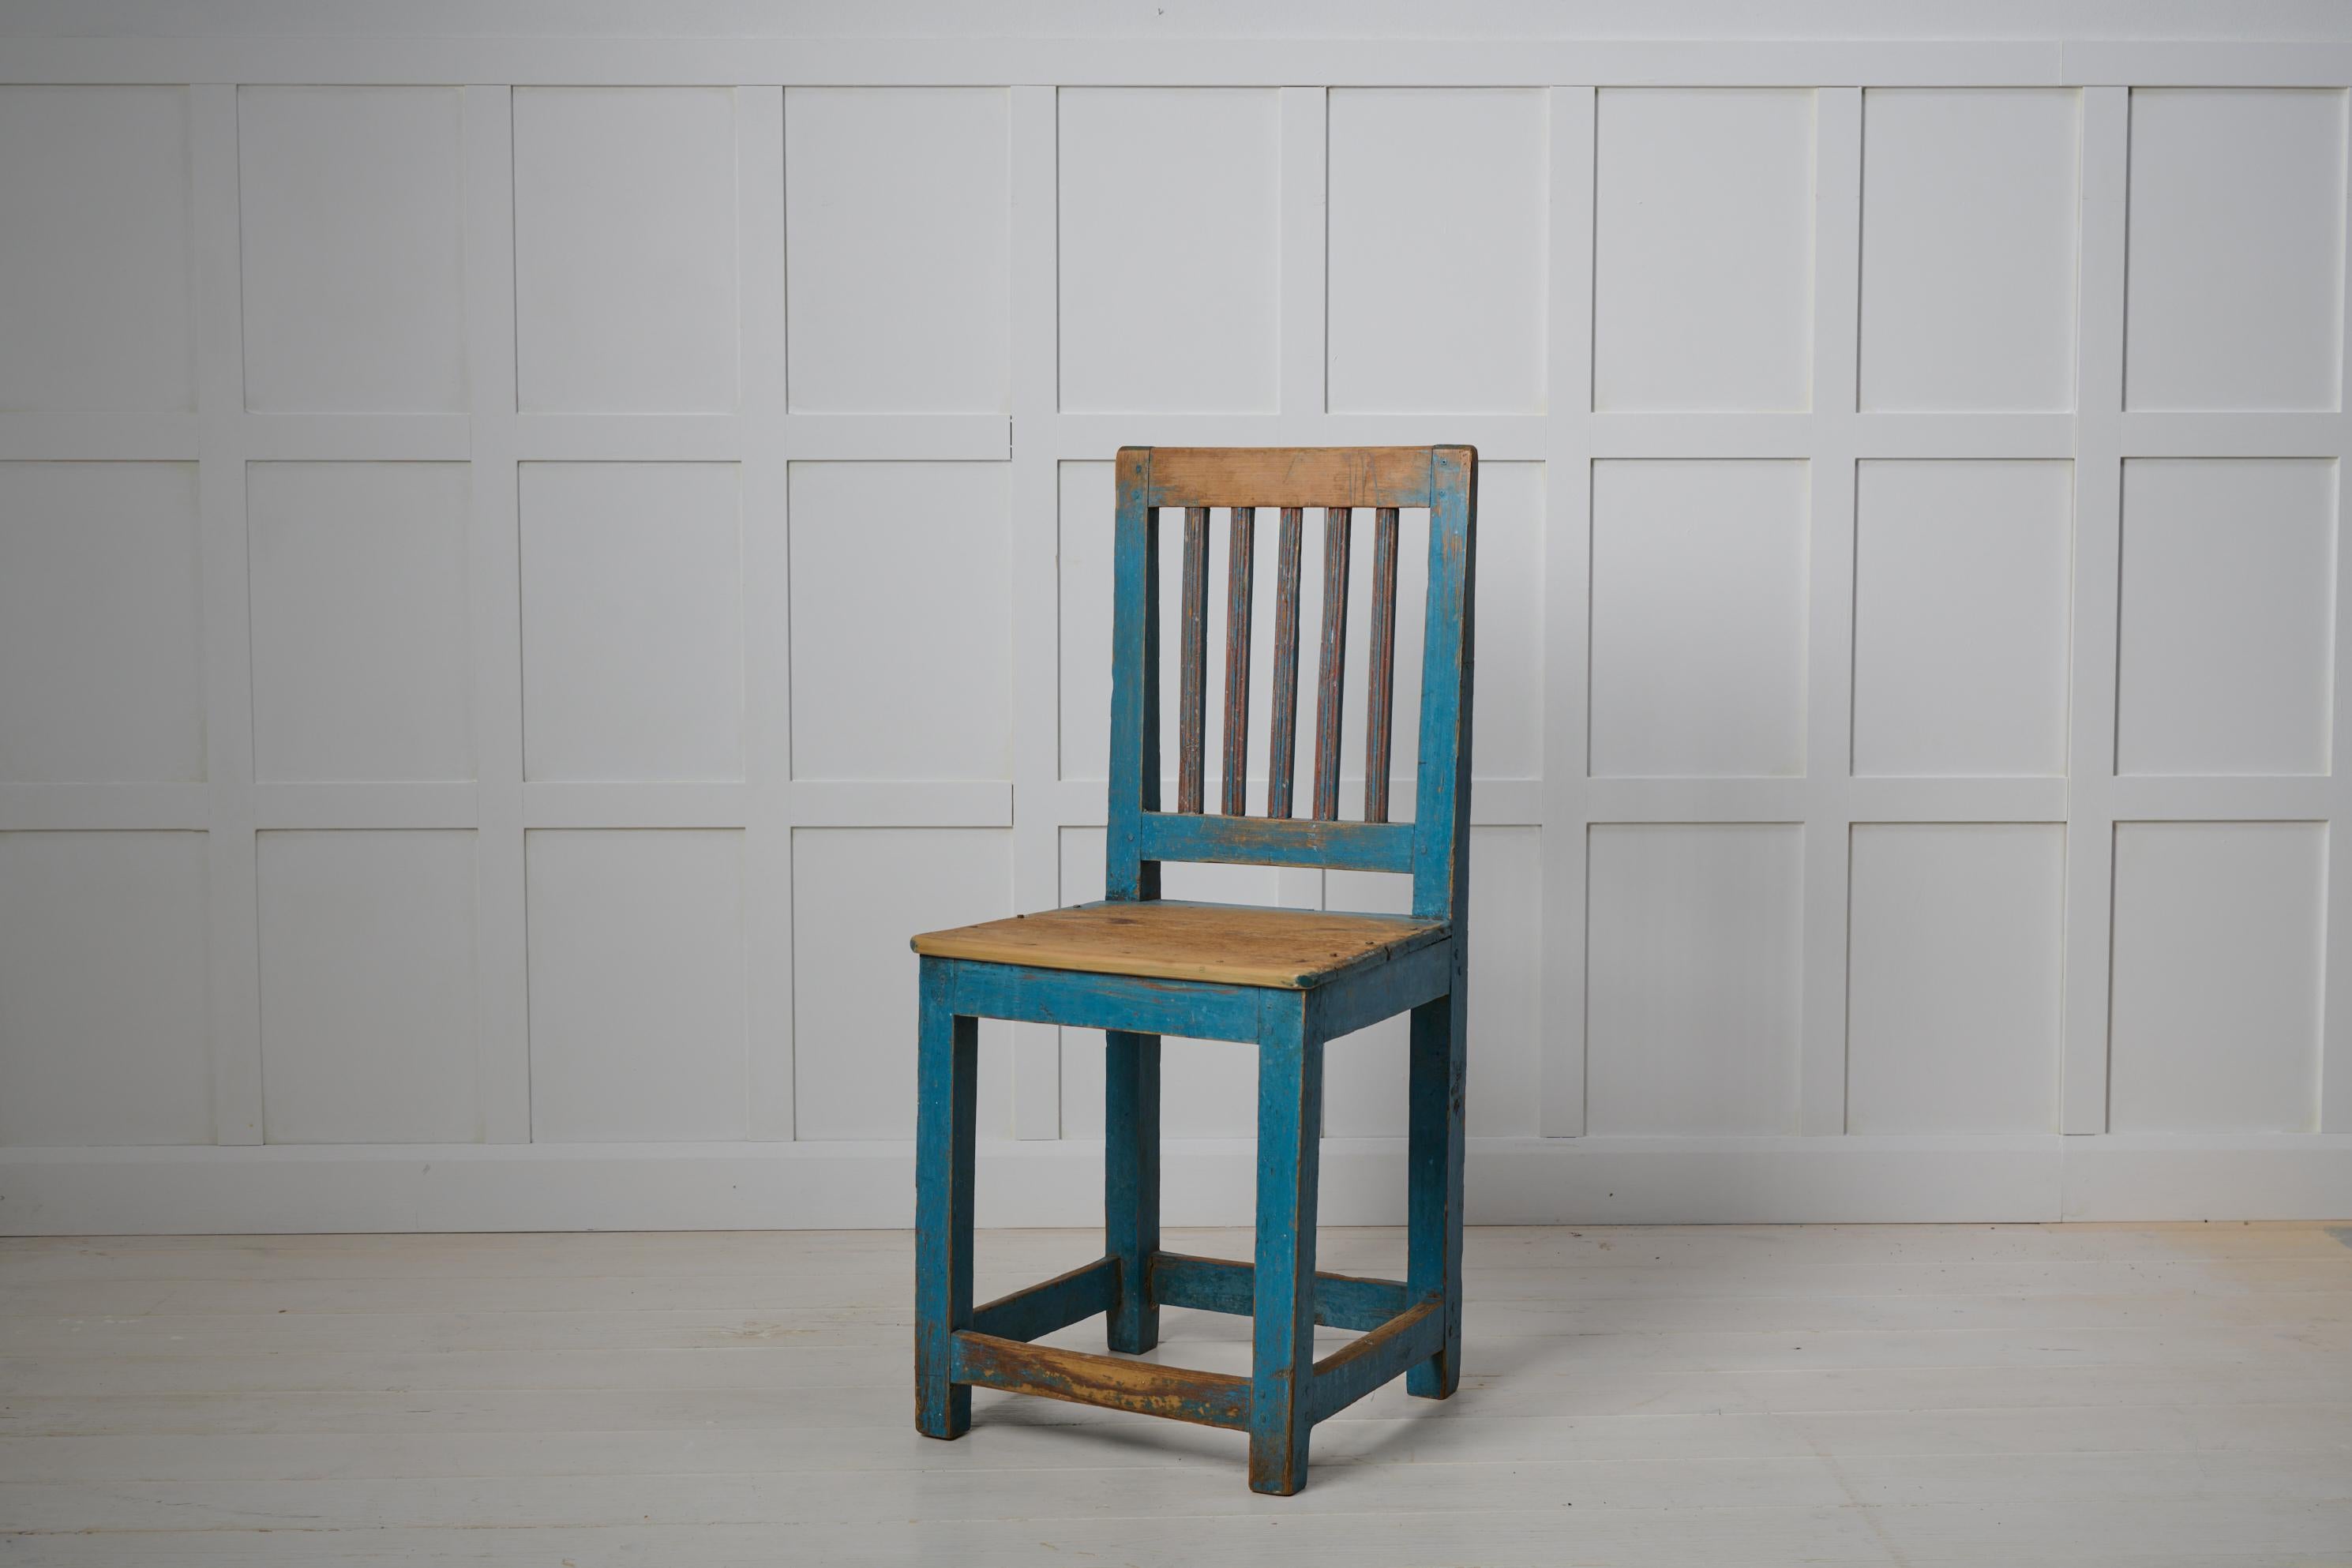 Charming Swedish country chair from northern Sweden made around 1820. The chair is a genuine country furniture with original blue paint. The paint has some distress and patina after 200 years of use, giving it a charming and rustic character.